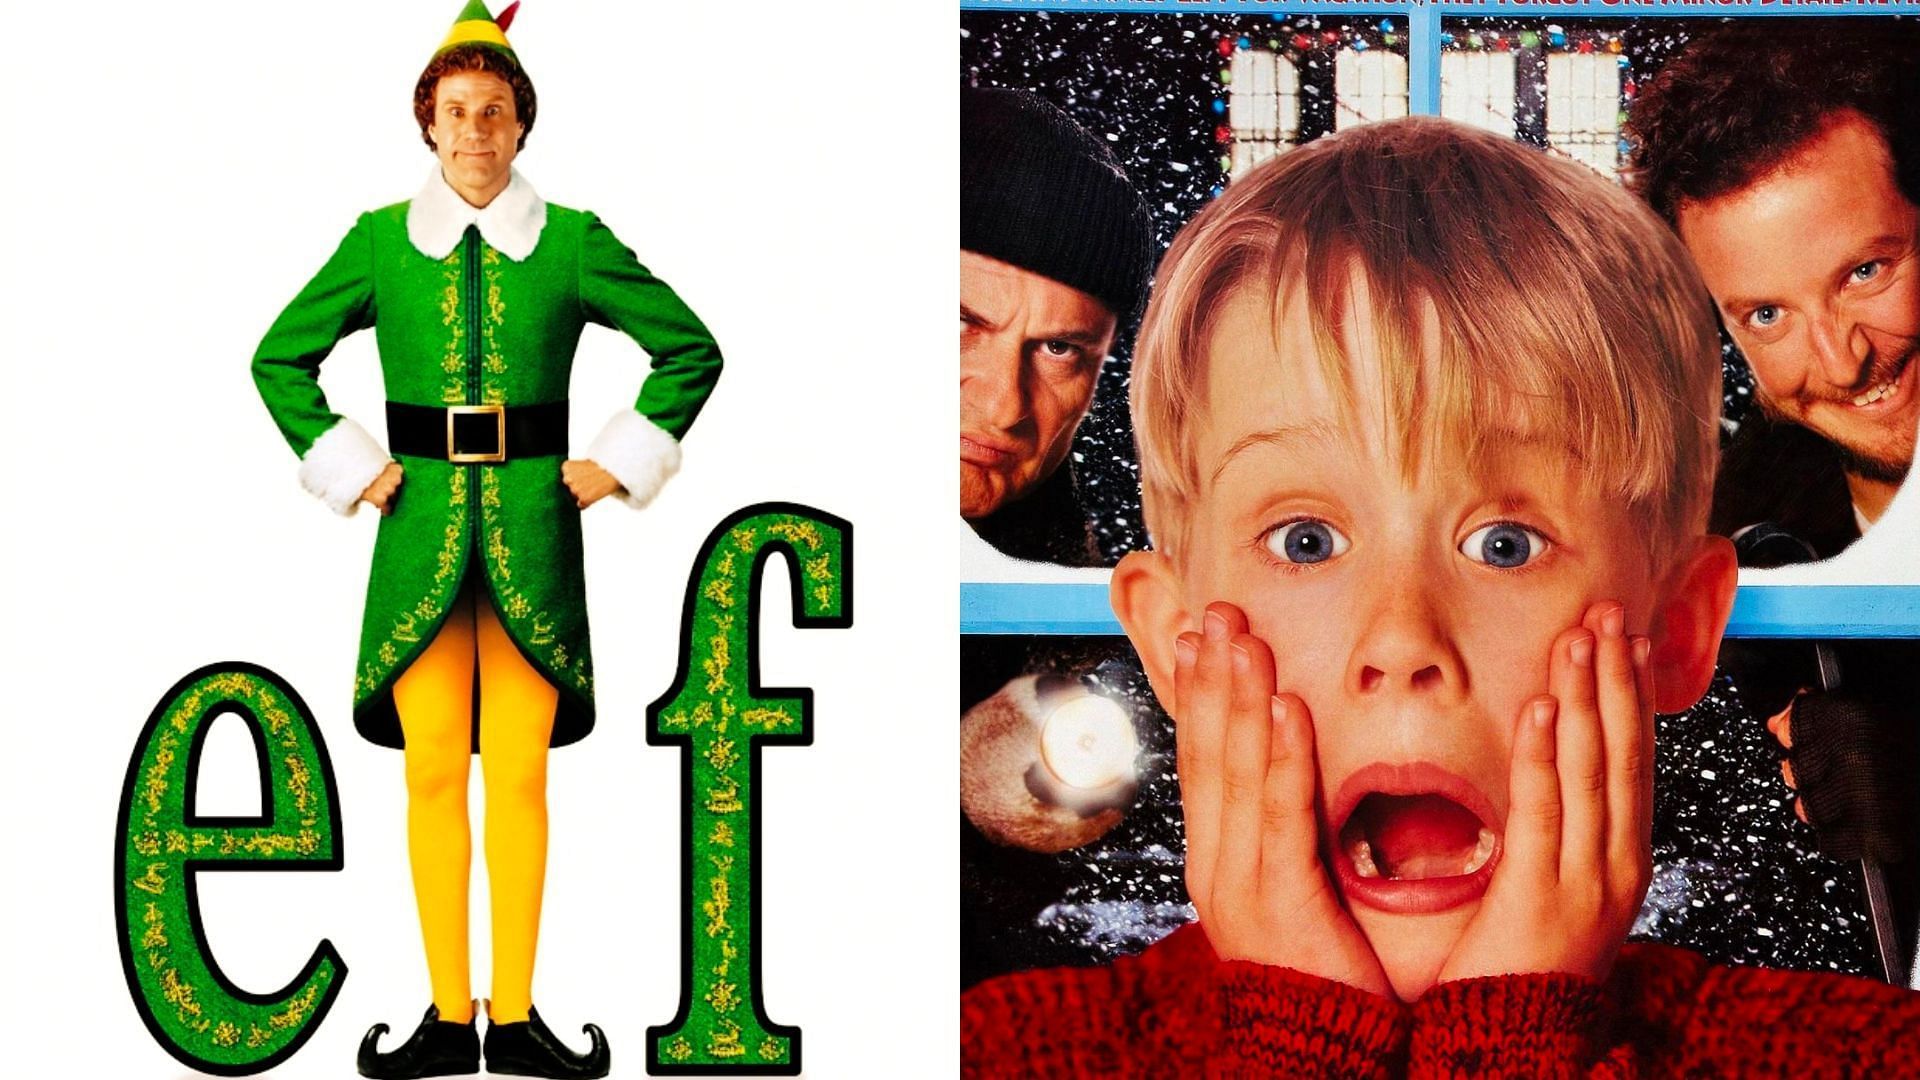 From (L) Elf to (R) Home Alone, there